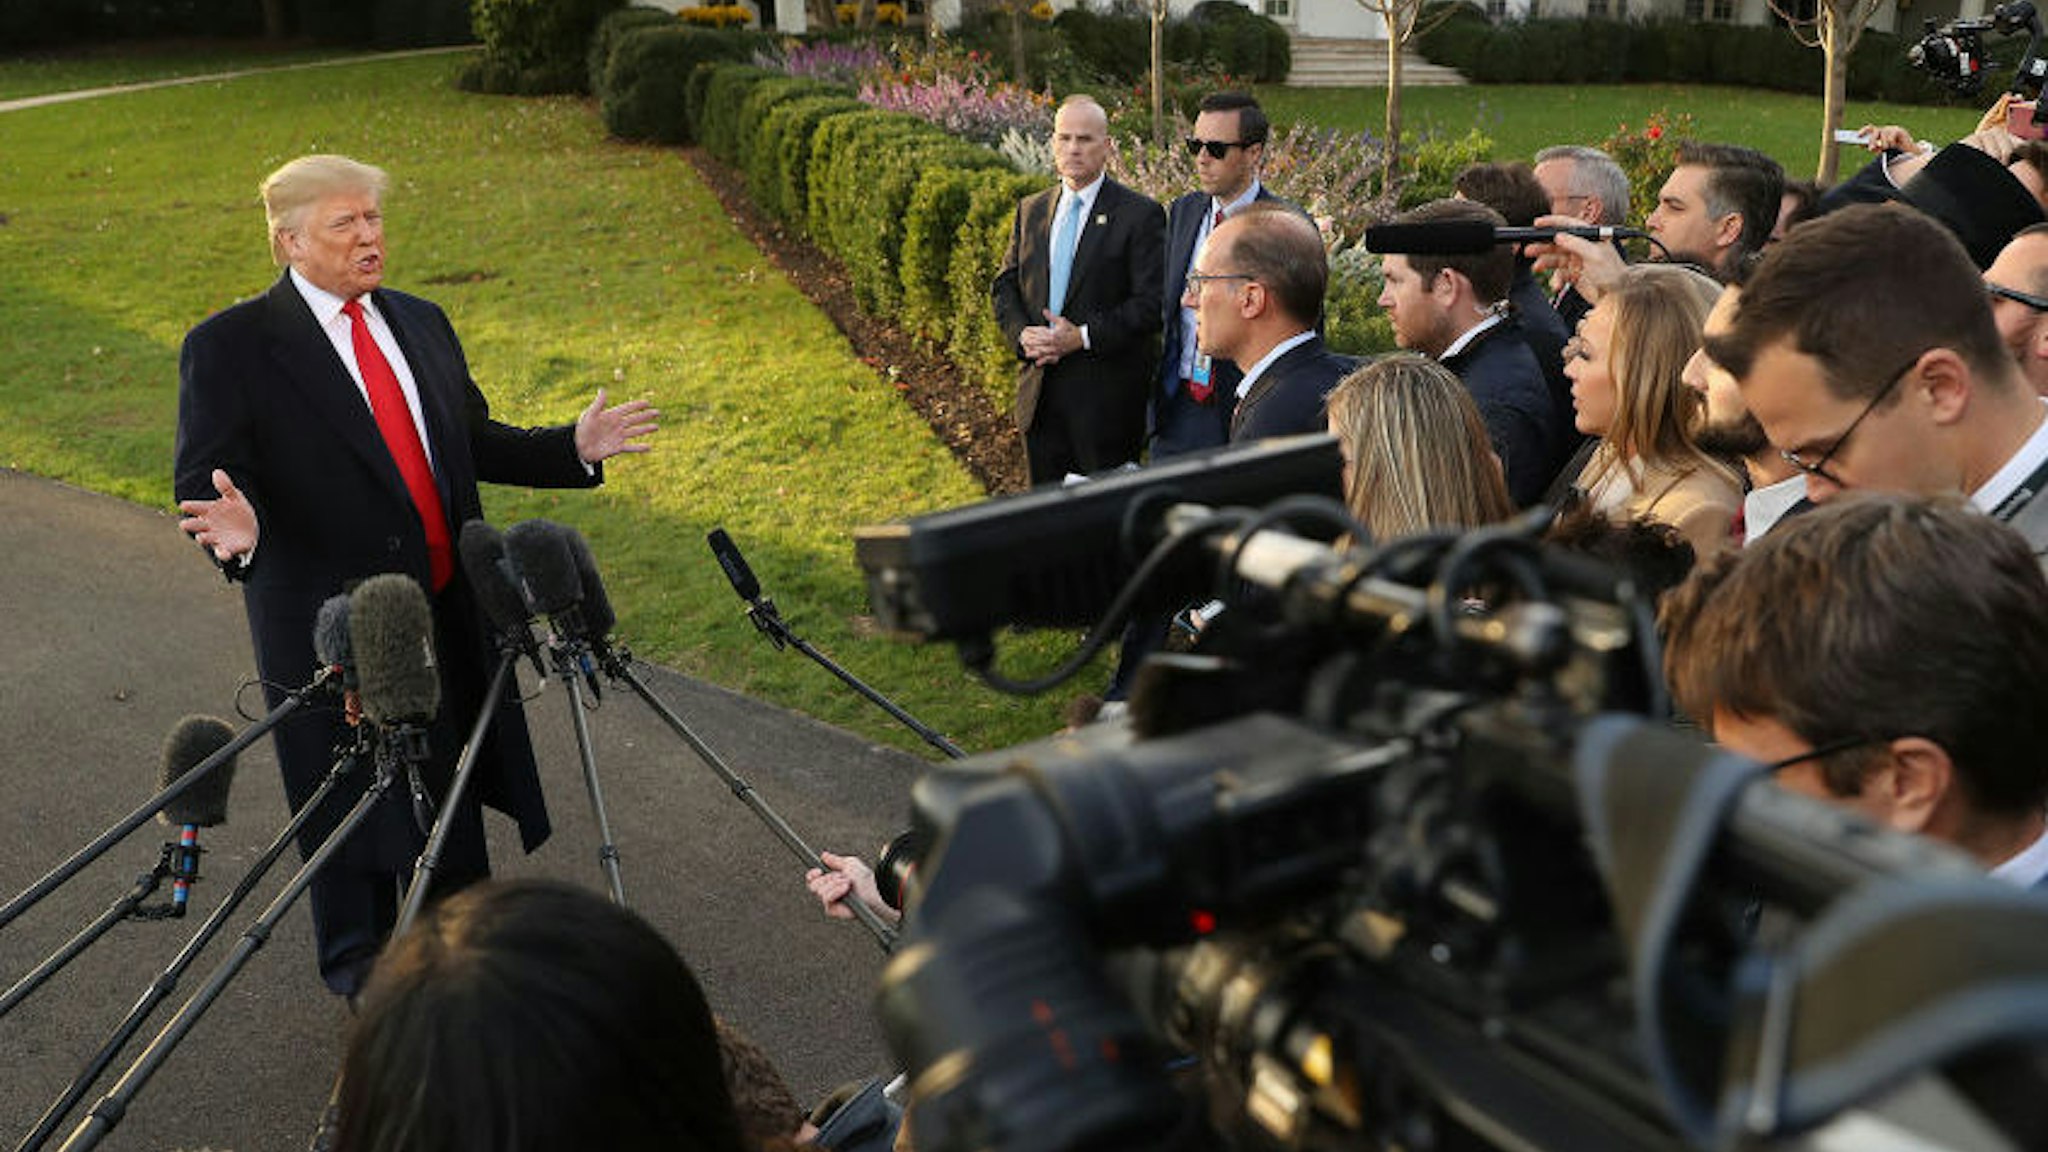 U.S. President Donald Trump talks to journalists while departing the White House November 04, 2019 in Washington, DC. Trump is traveling to Kentucky for a 'Keep America Great' campaign rally in Lexington, Kentucky. (Photo by Chip Somodevilla/Getty Images)